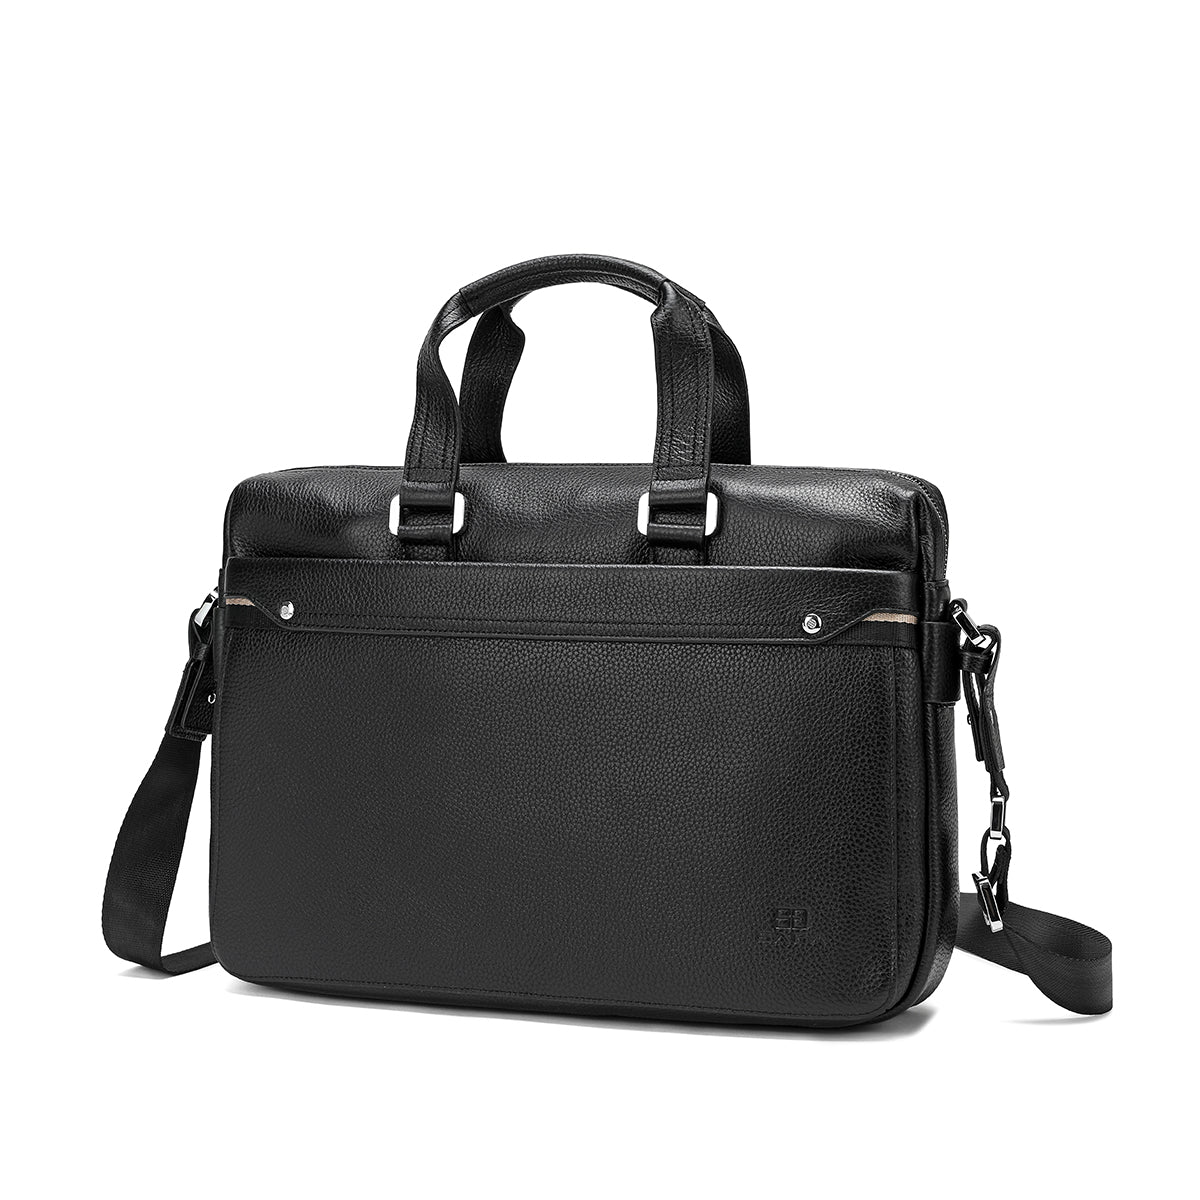 High quality and luxurious 100% genuine leather laptop bag, black colour